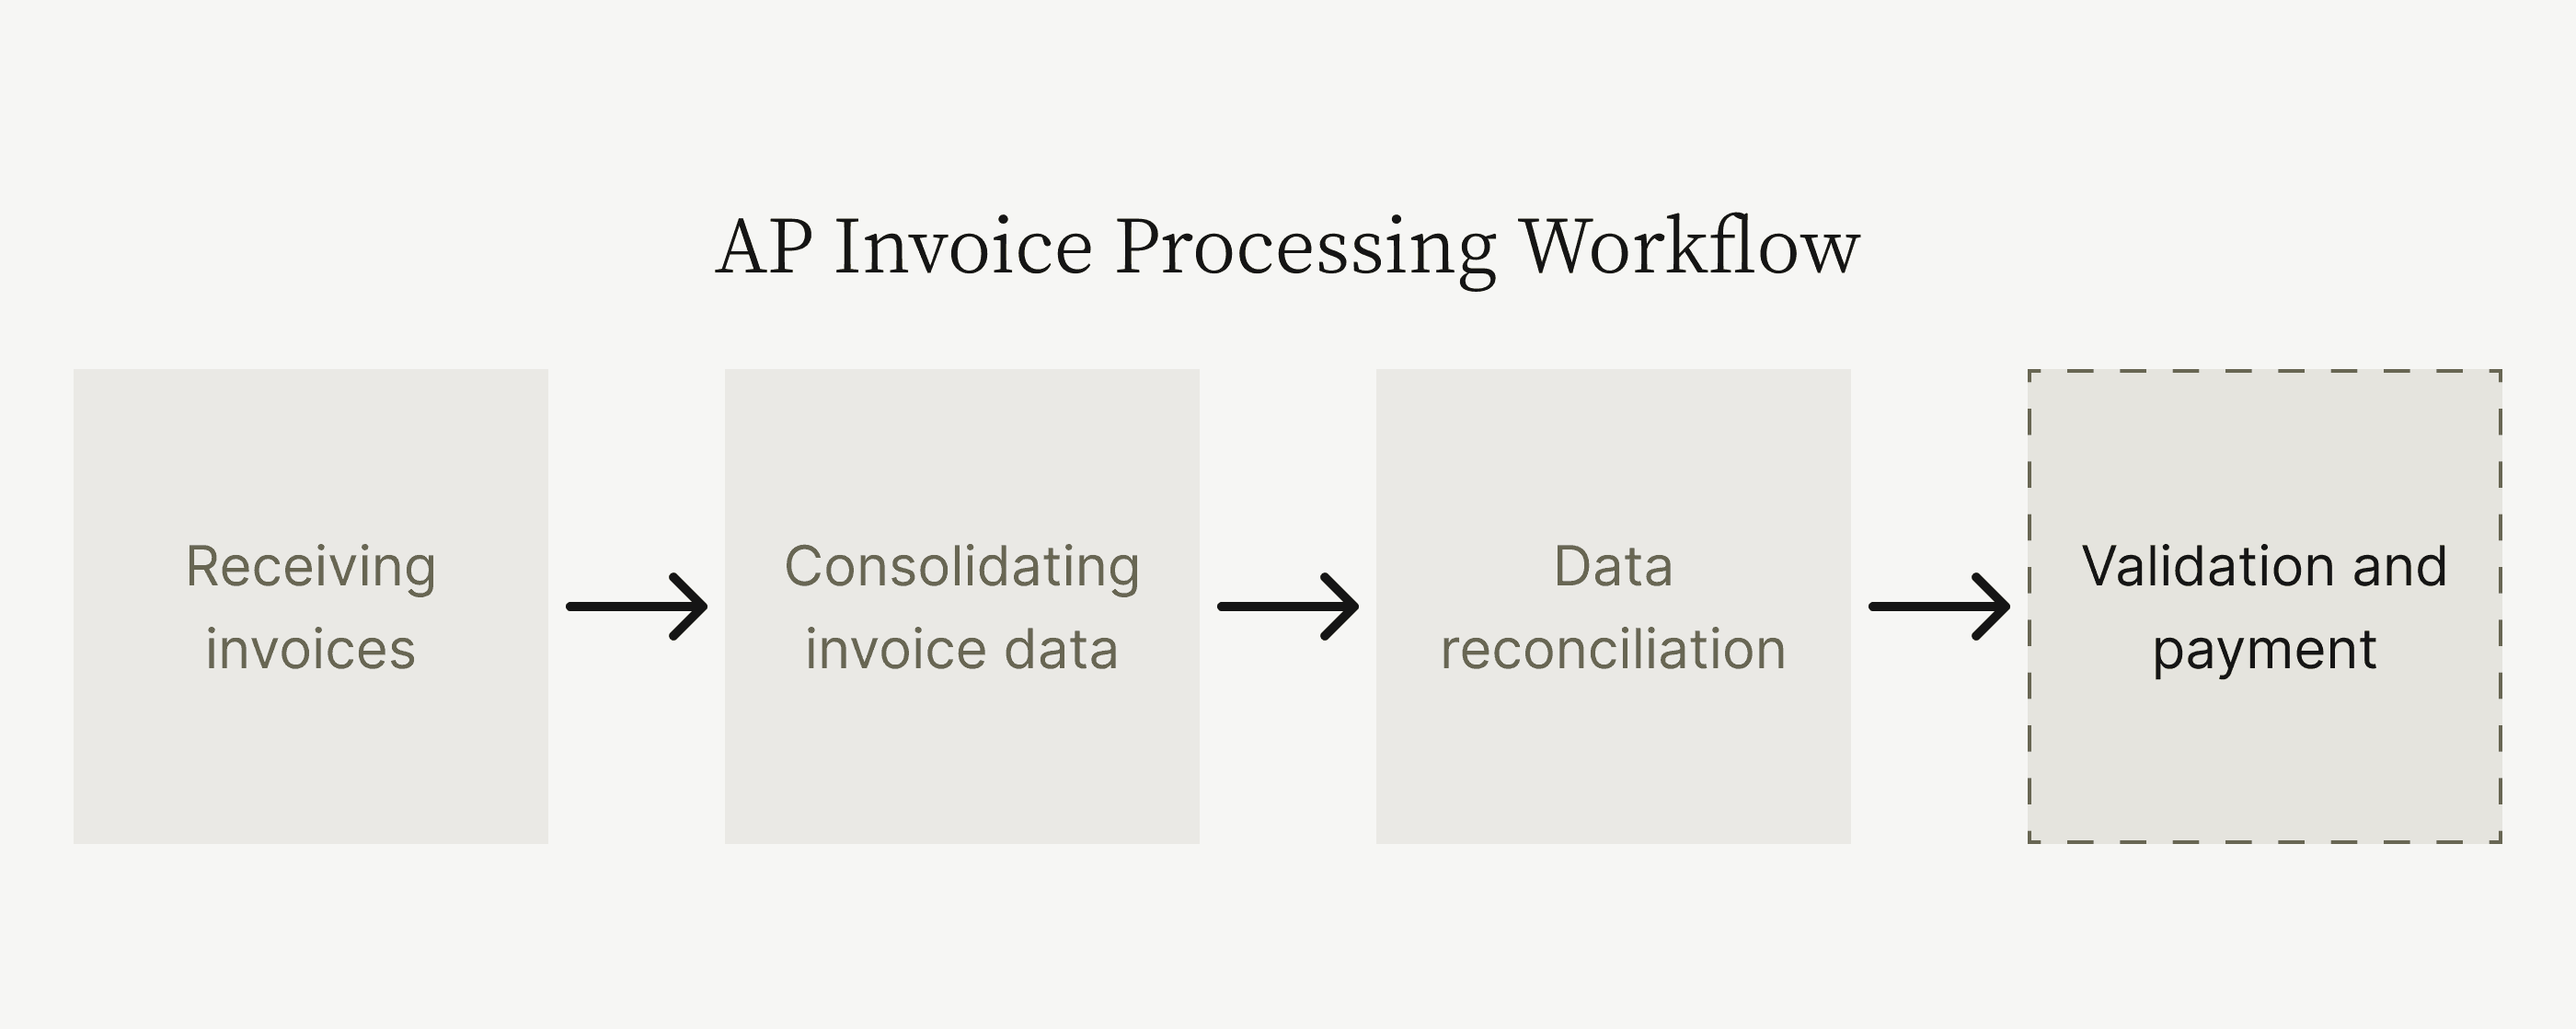 AP invoice processing workflow step 4: validation and payment